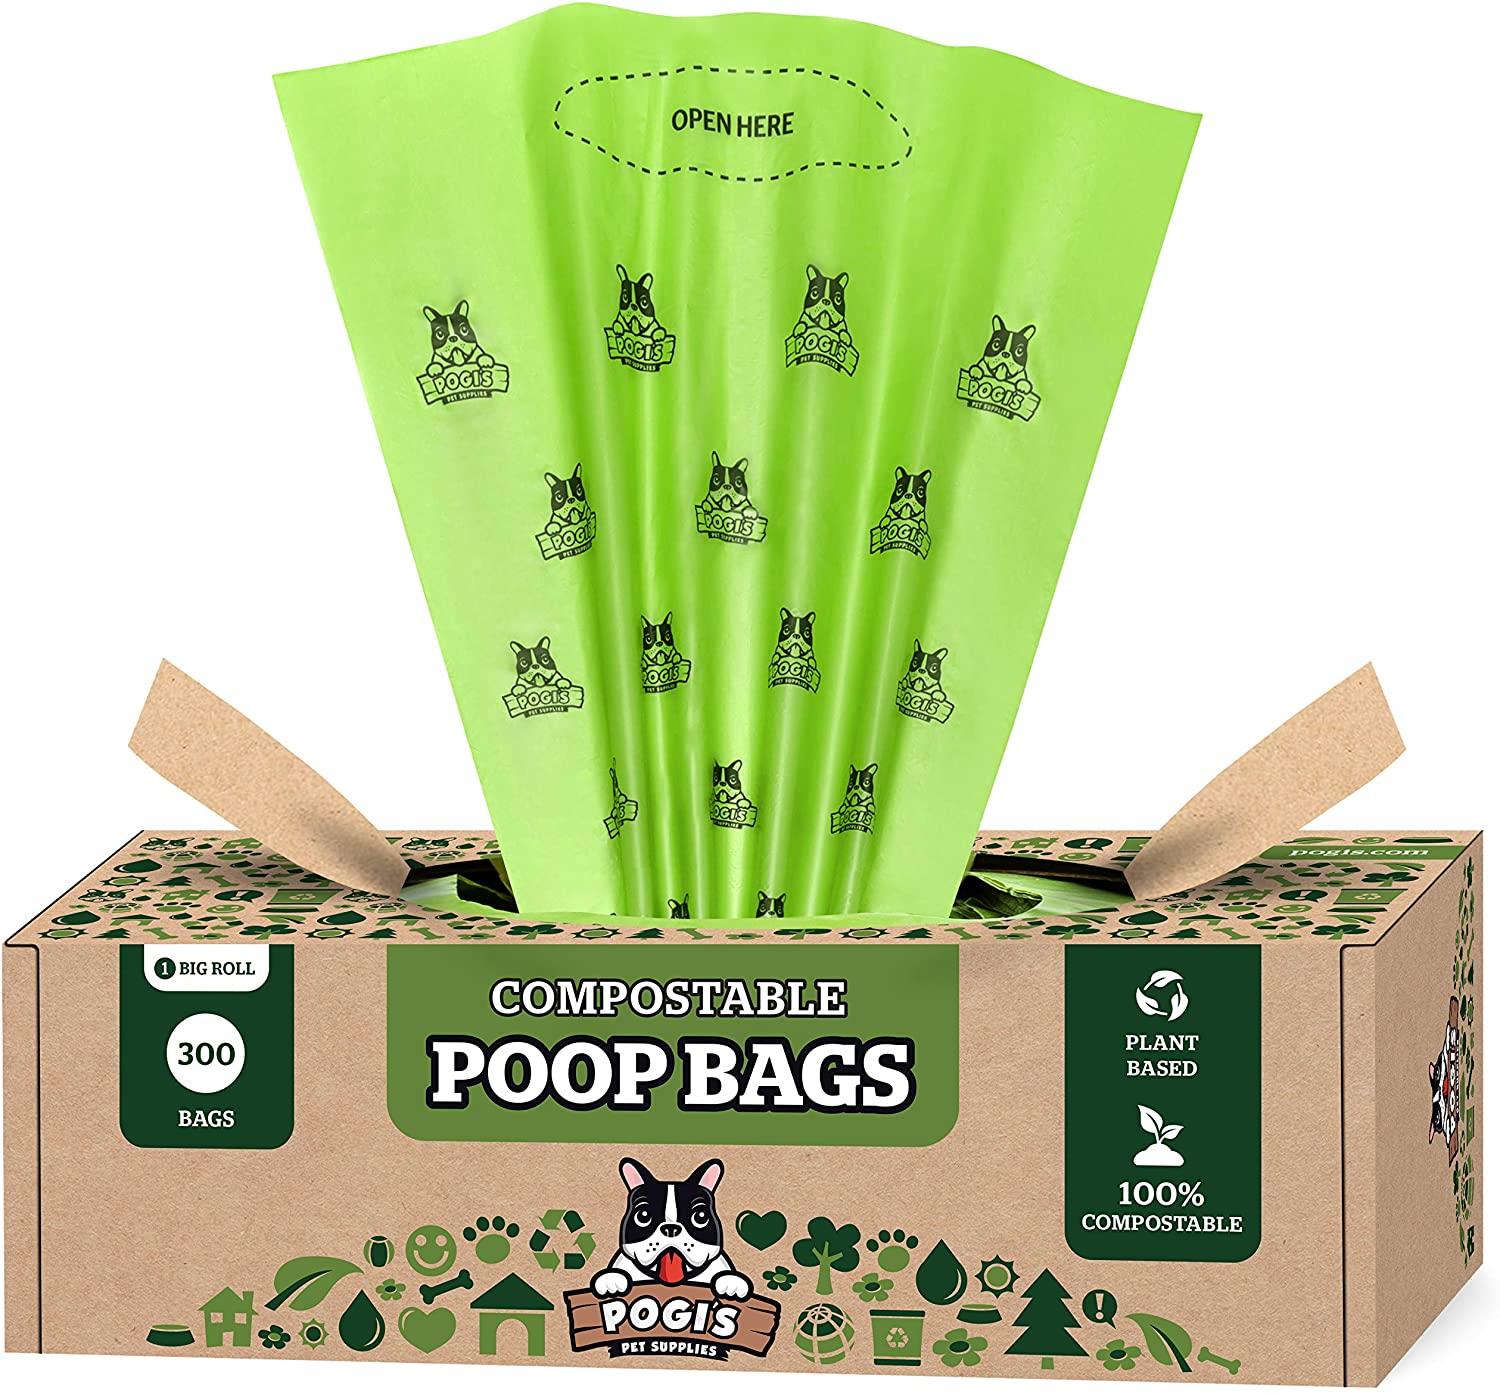 Large Biodegradable Dog Poop Bags With Handles Collection By Pogi's Pet Supplies